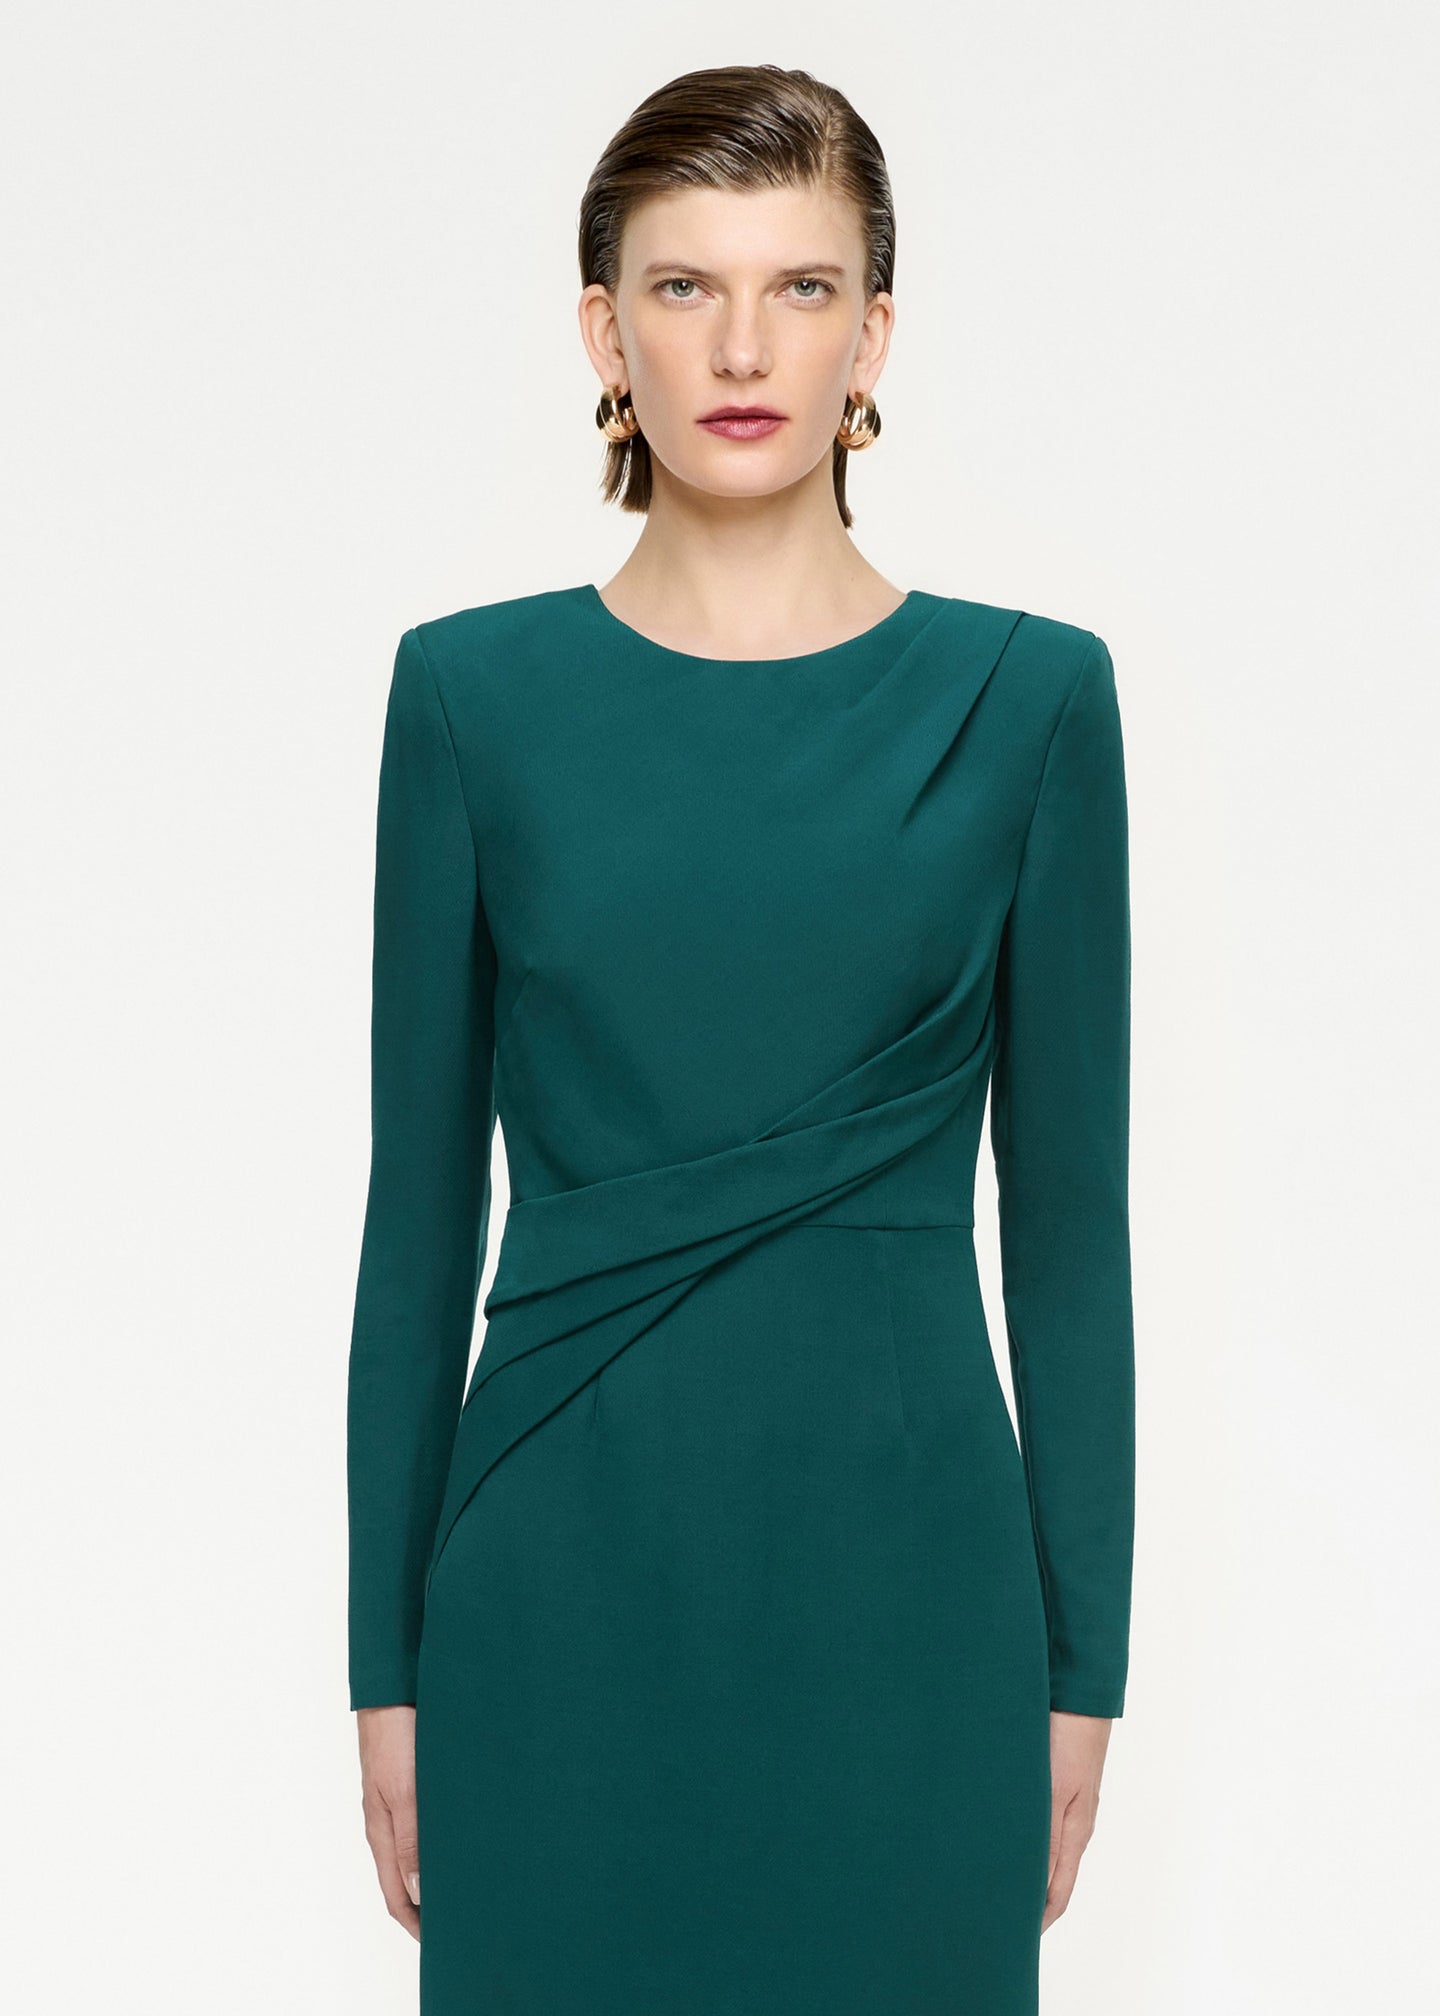 A close up of a woman wearing the Long Sleeve Wool Silk Midi Dress in Green